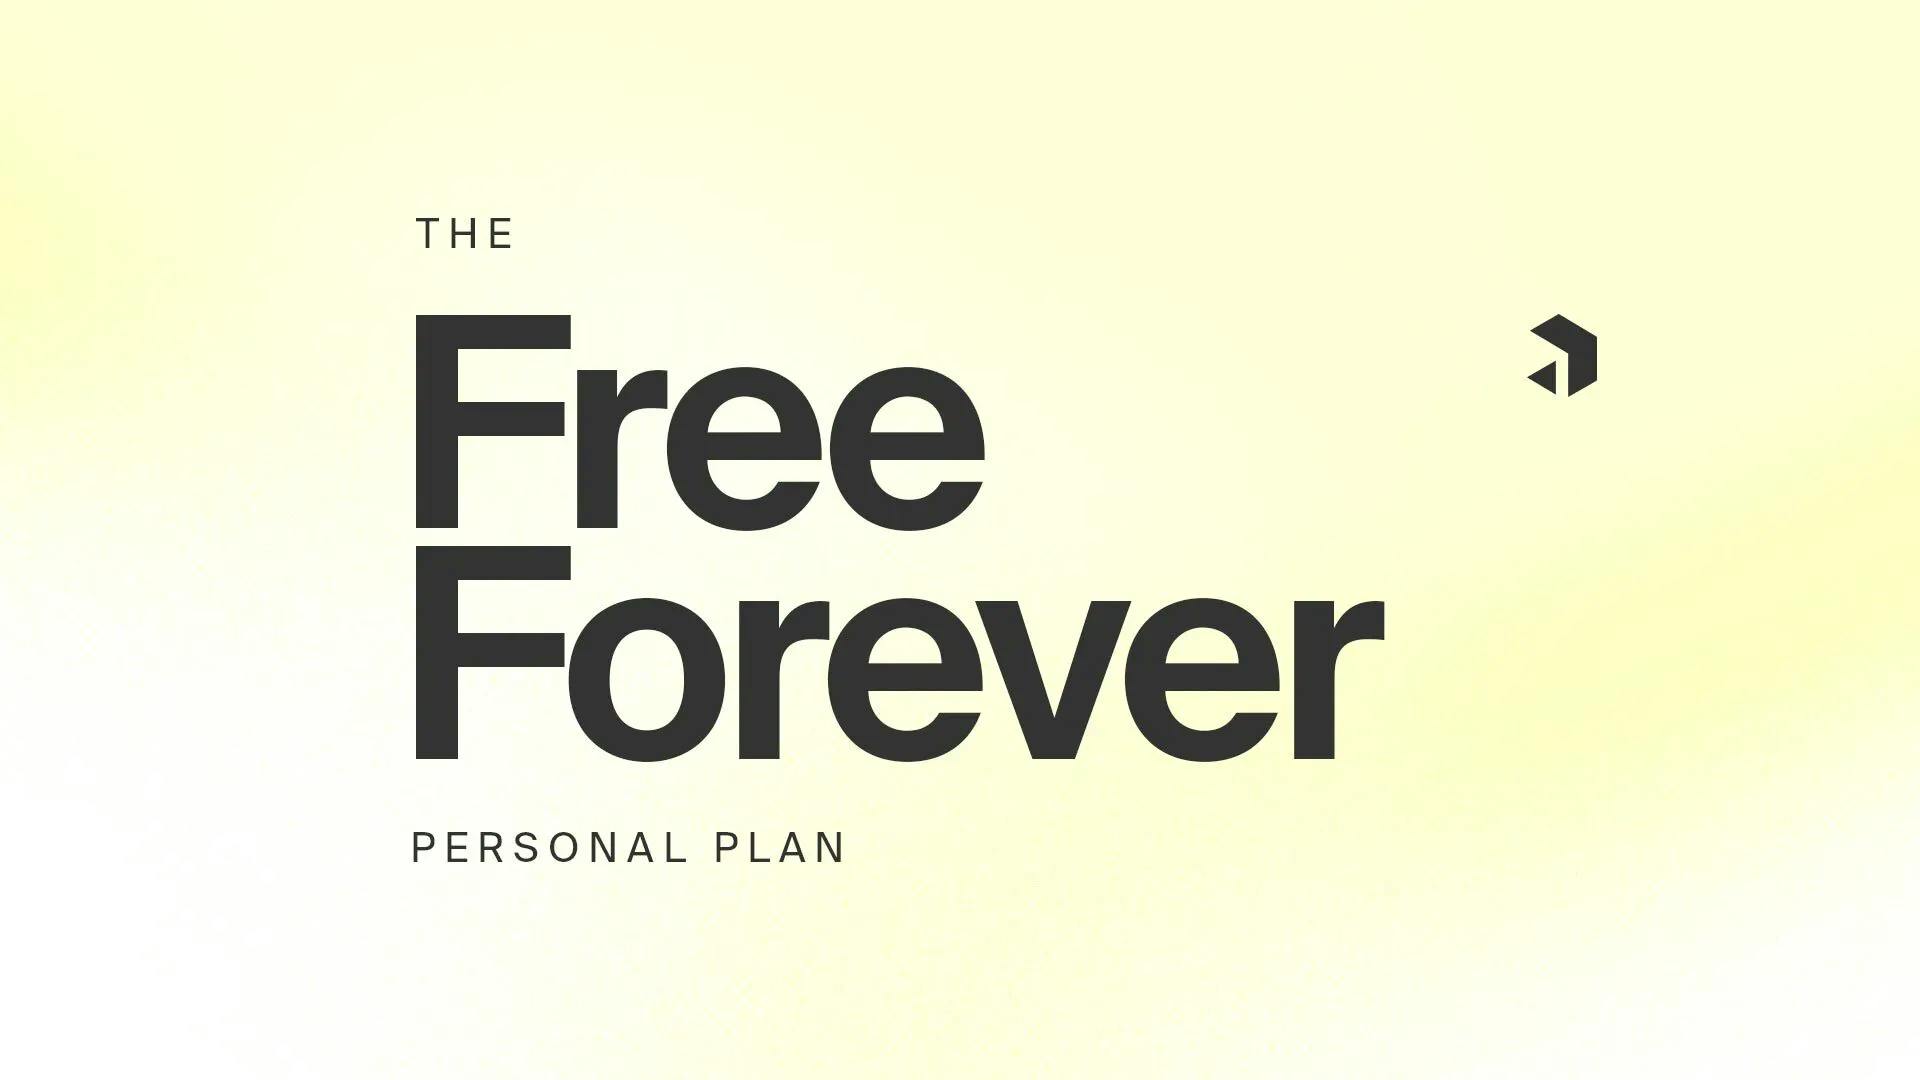 Our New Free Forever Personal Plan